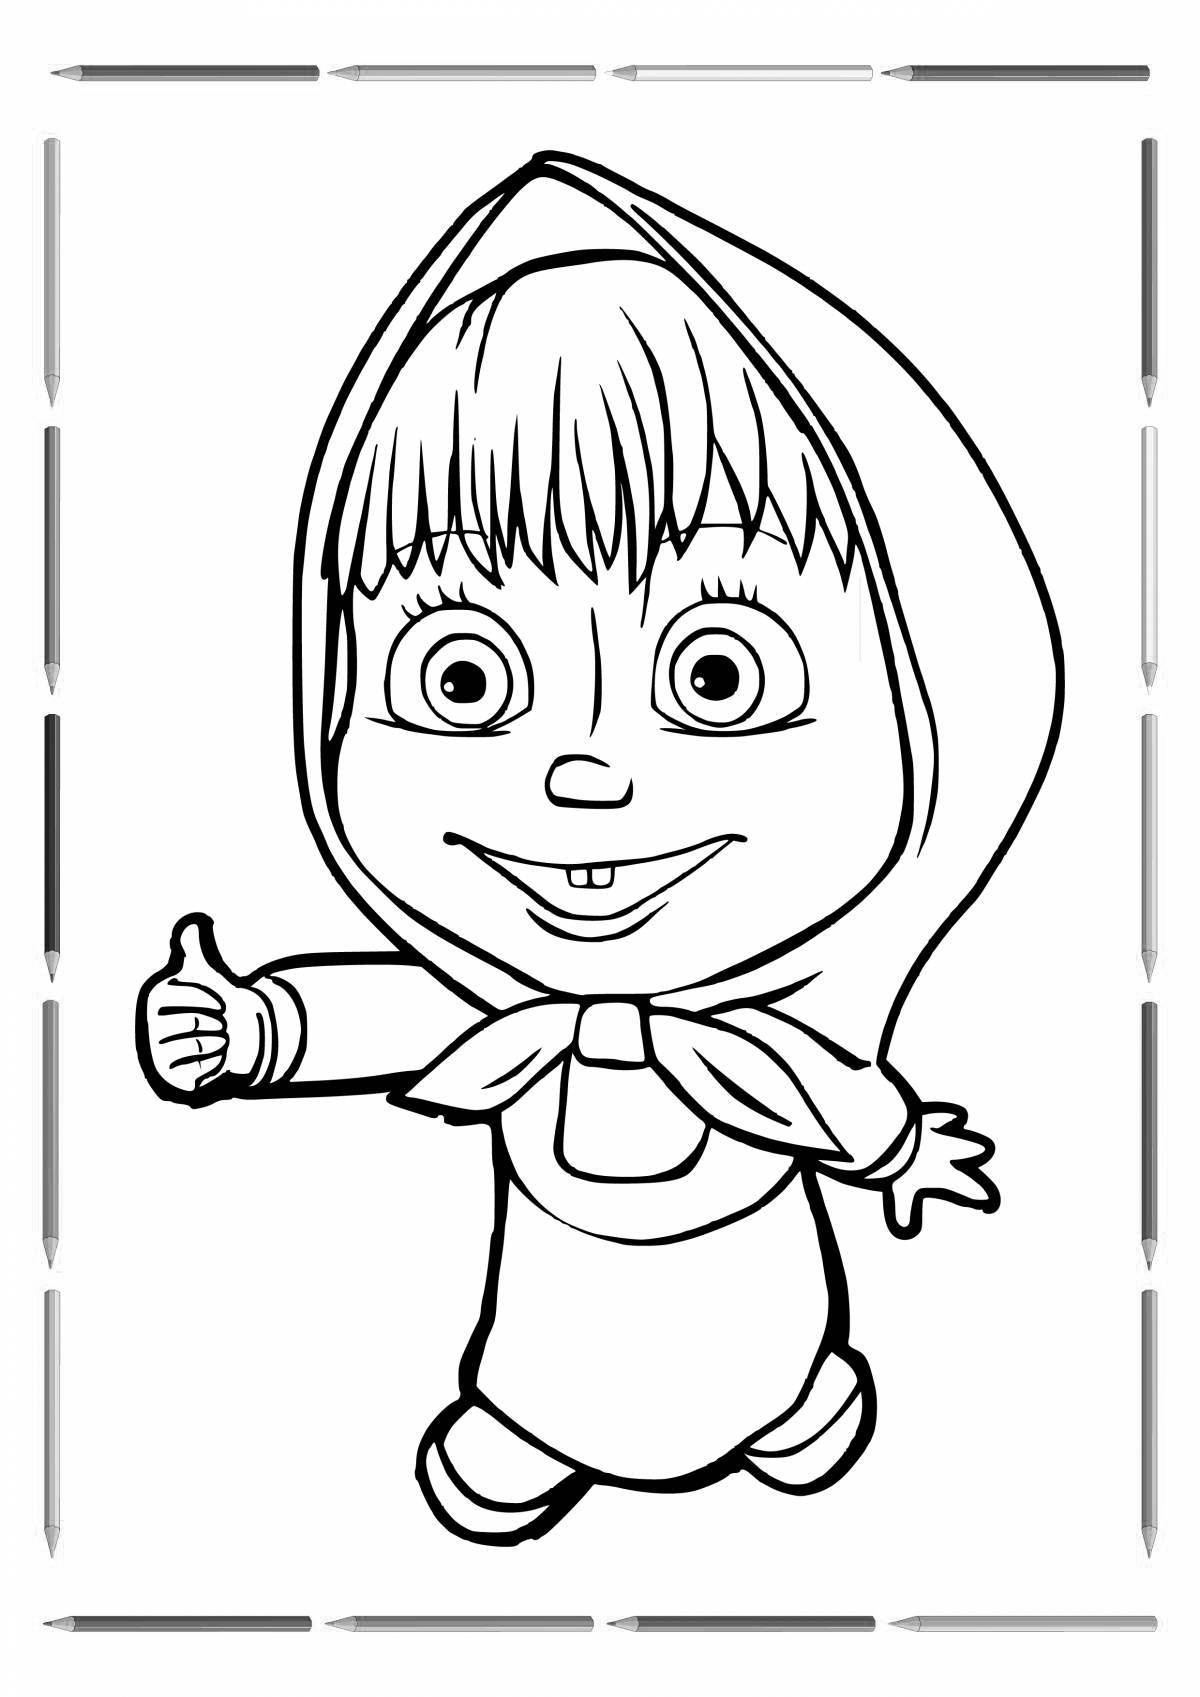 Beckoning Masha and the bear deluxe coloring book